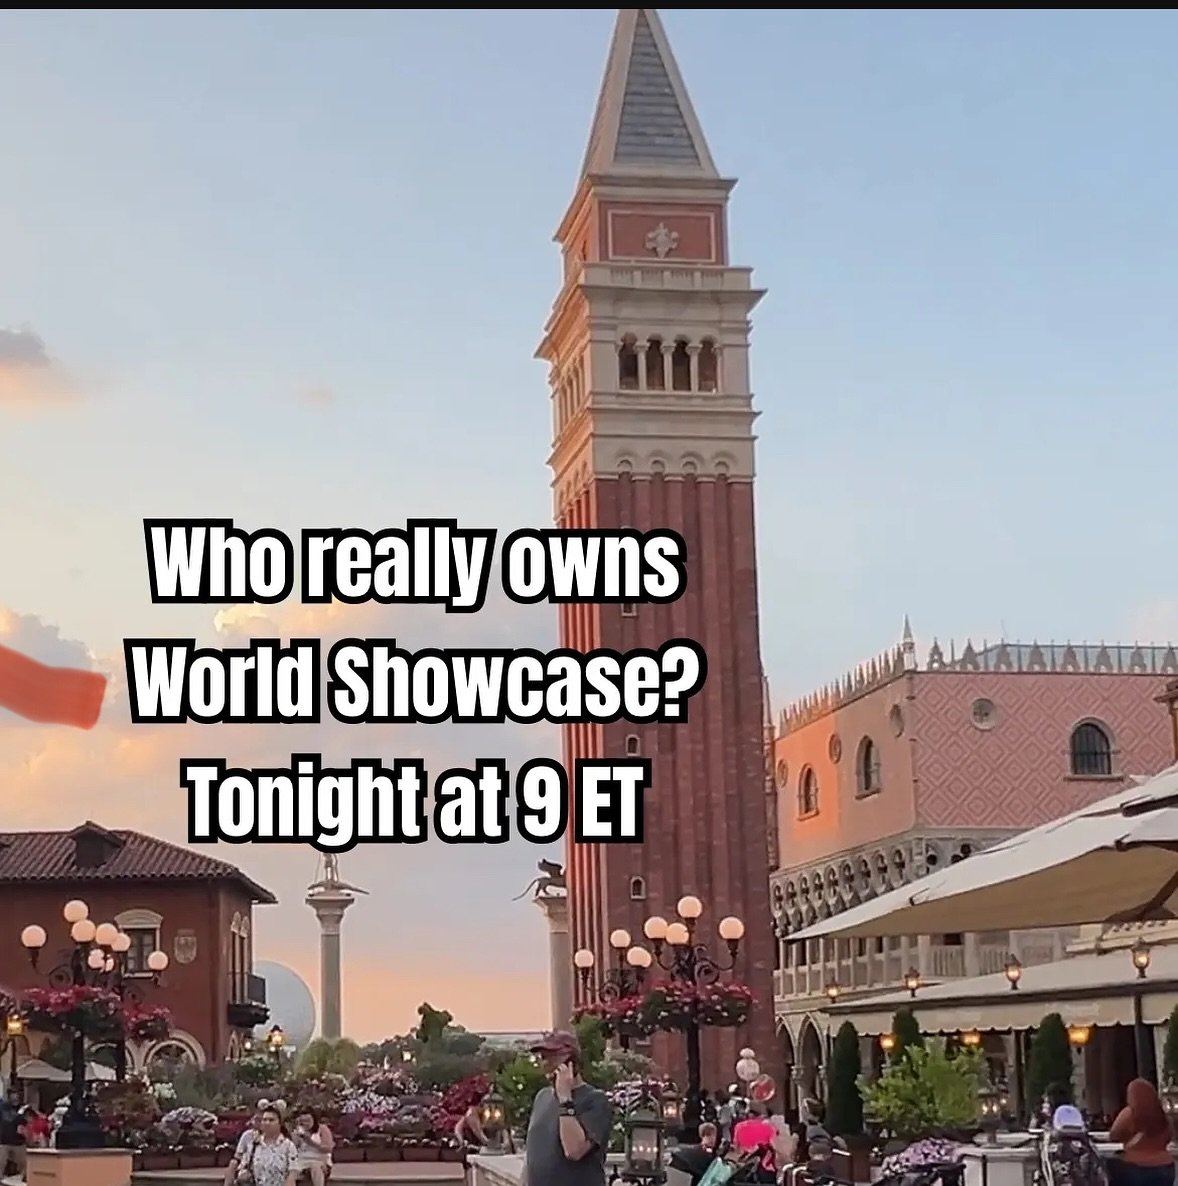 Tonight at 9 PM on my YouTube channel, OrlandoParksGuy, my latest video premieres: Who really owns world showcase at Epcot? #epcot #disneyworld #wdw